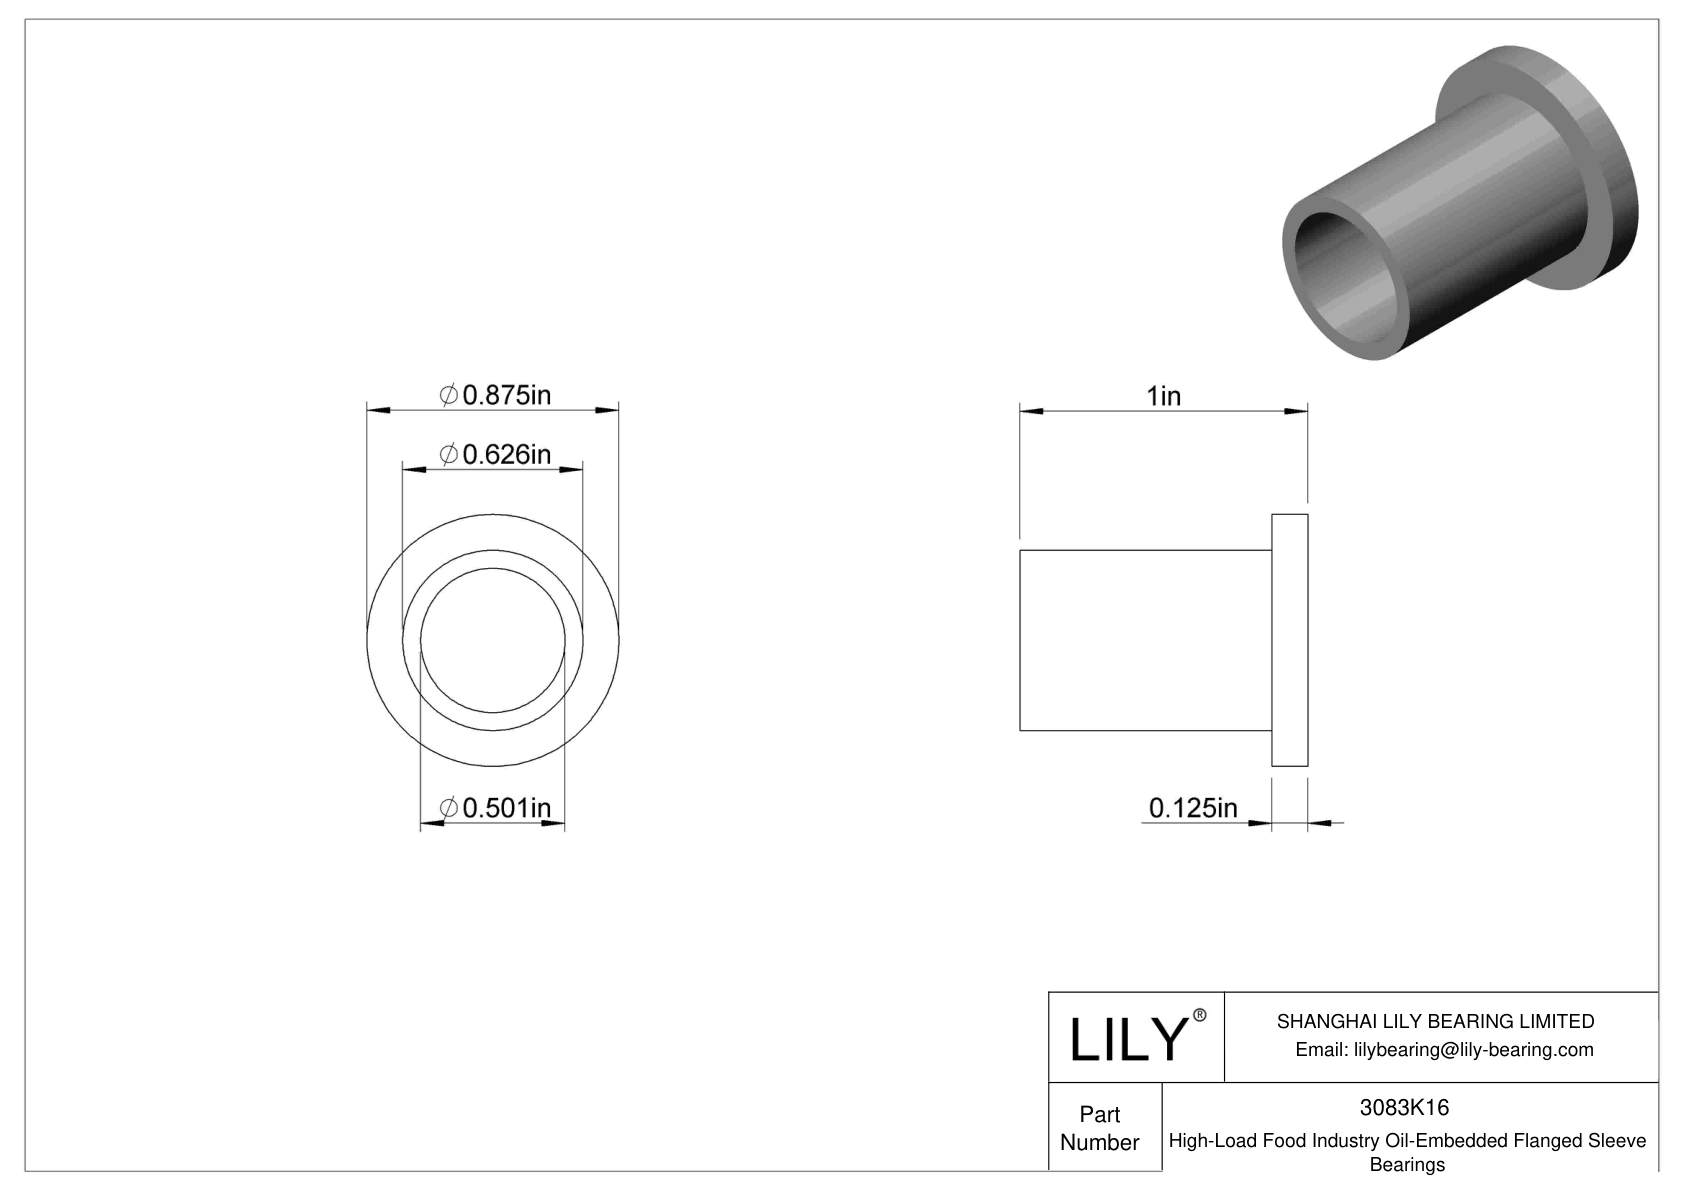 DAIDKBG High-Load Food Industry Oil-Embedded Flanged Sleeve Bearings cad drawing